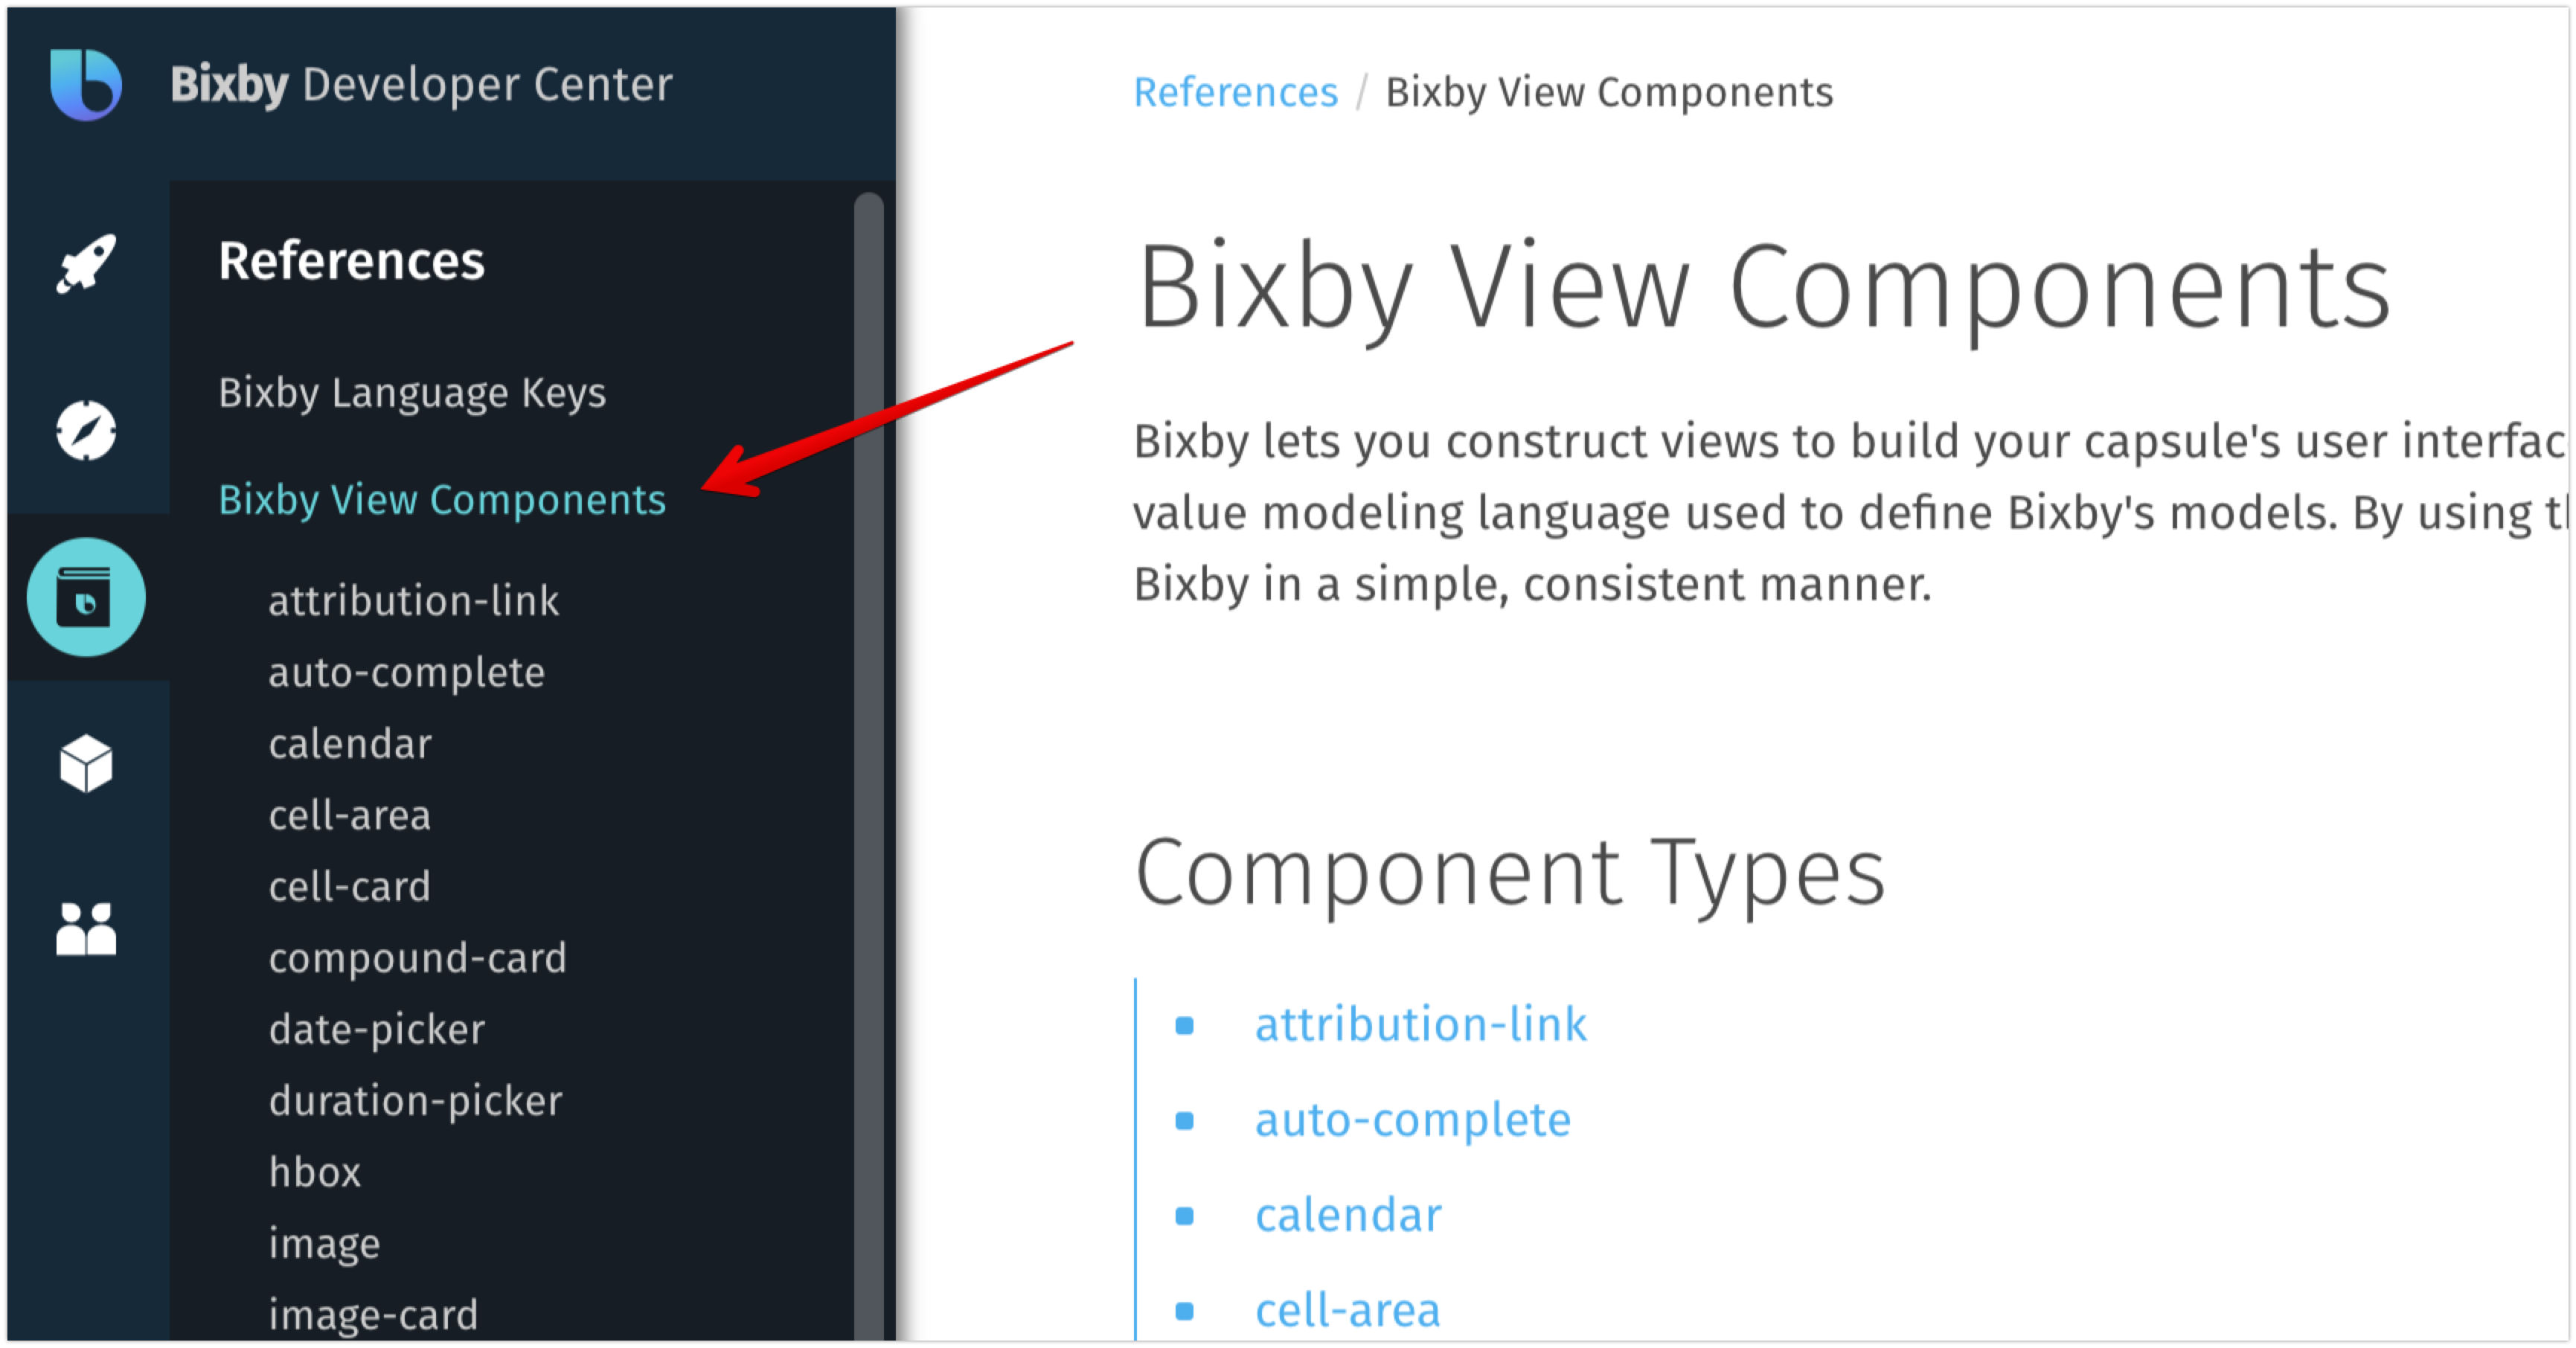 Bixby Views Components Reference page in the Developer Center